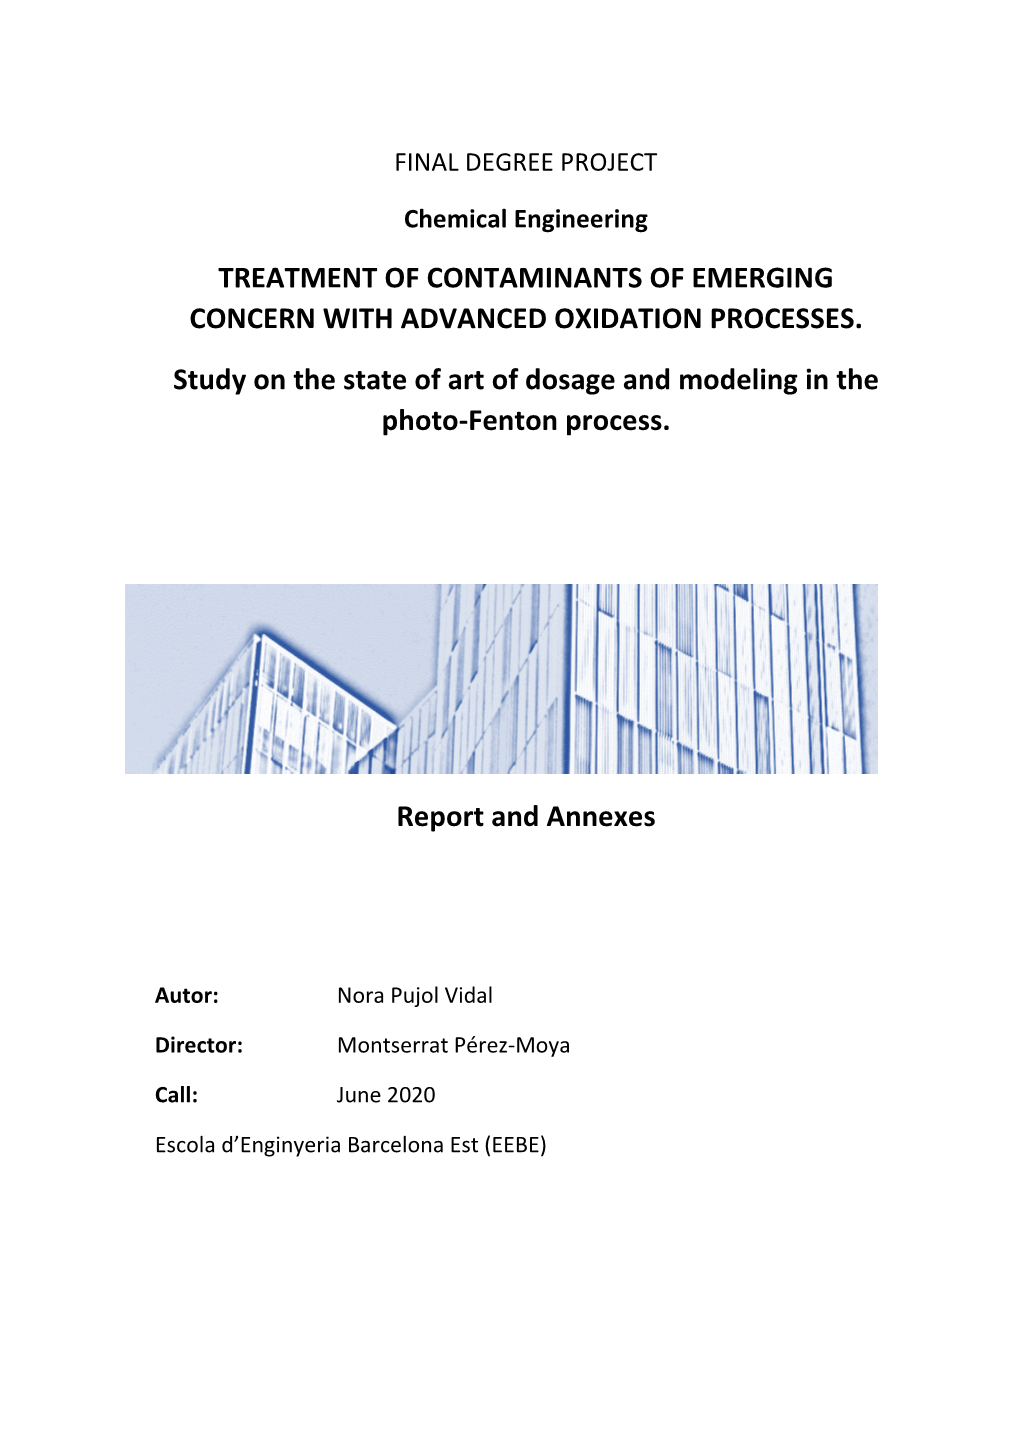 Treatment of Contaminants of Emerging Concern with Advanced Oxidation Processes